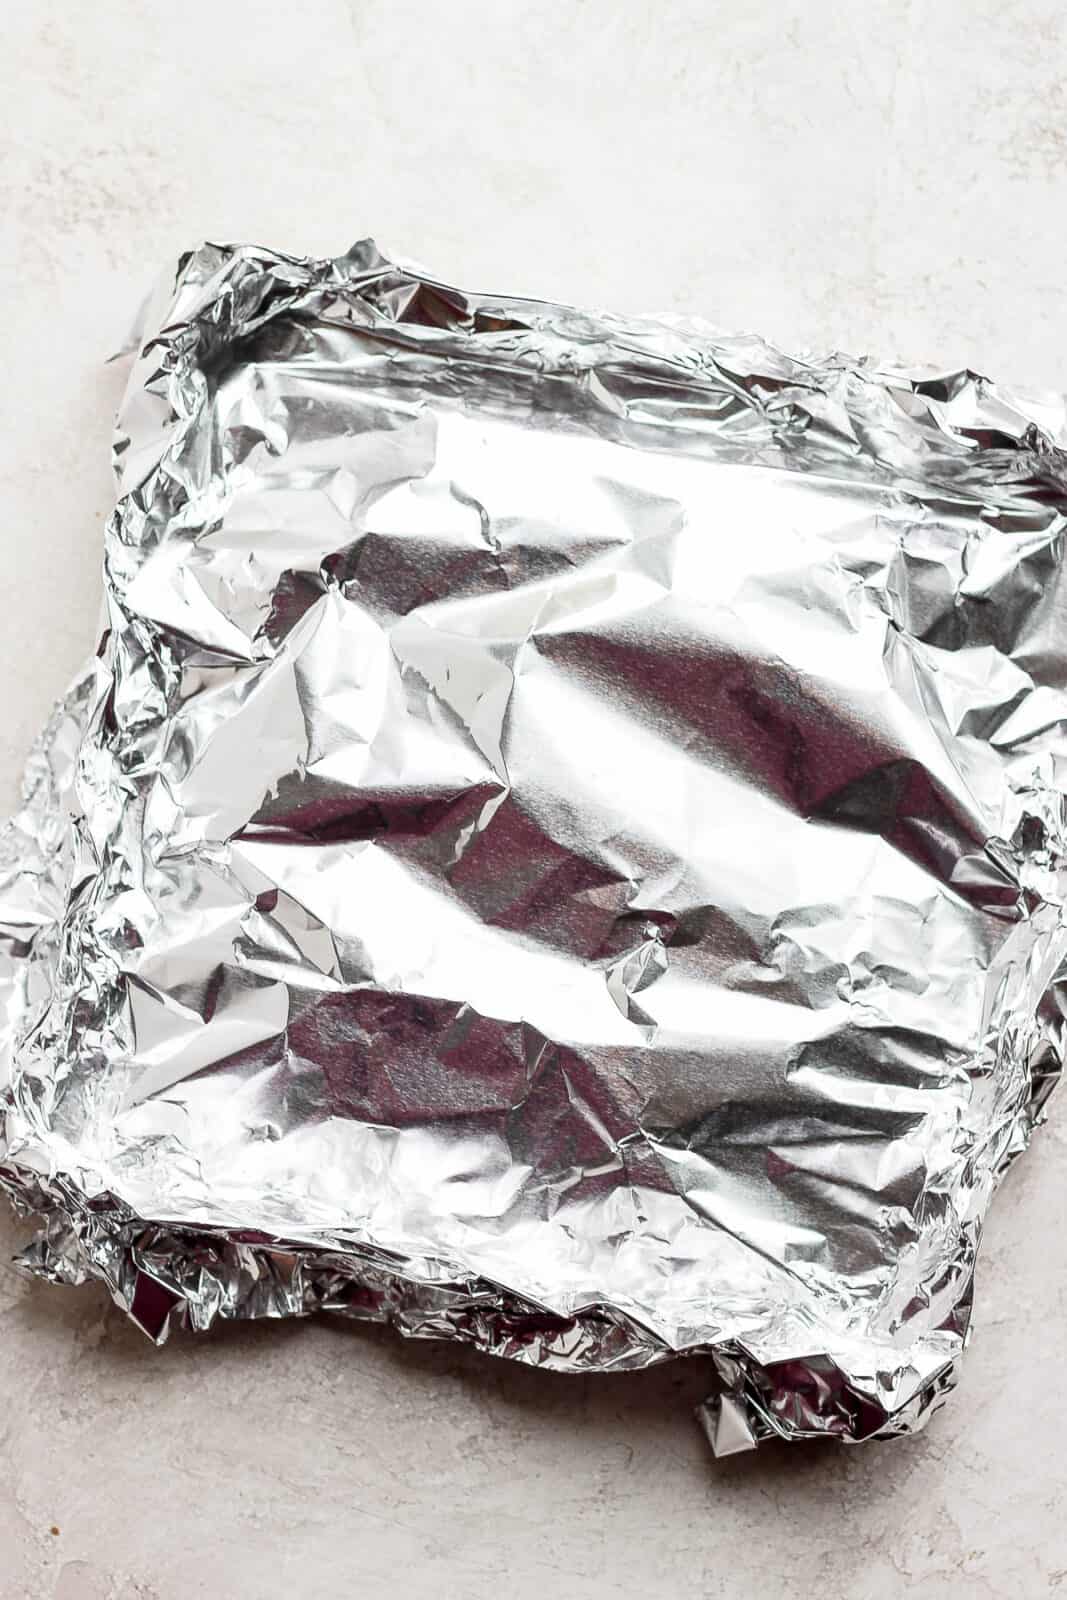 Cut up potatoes all wrapped up in foil.